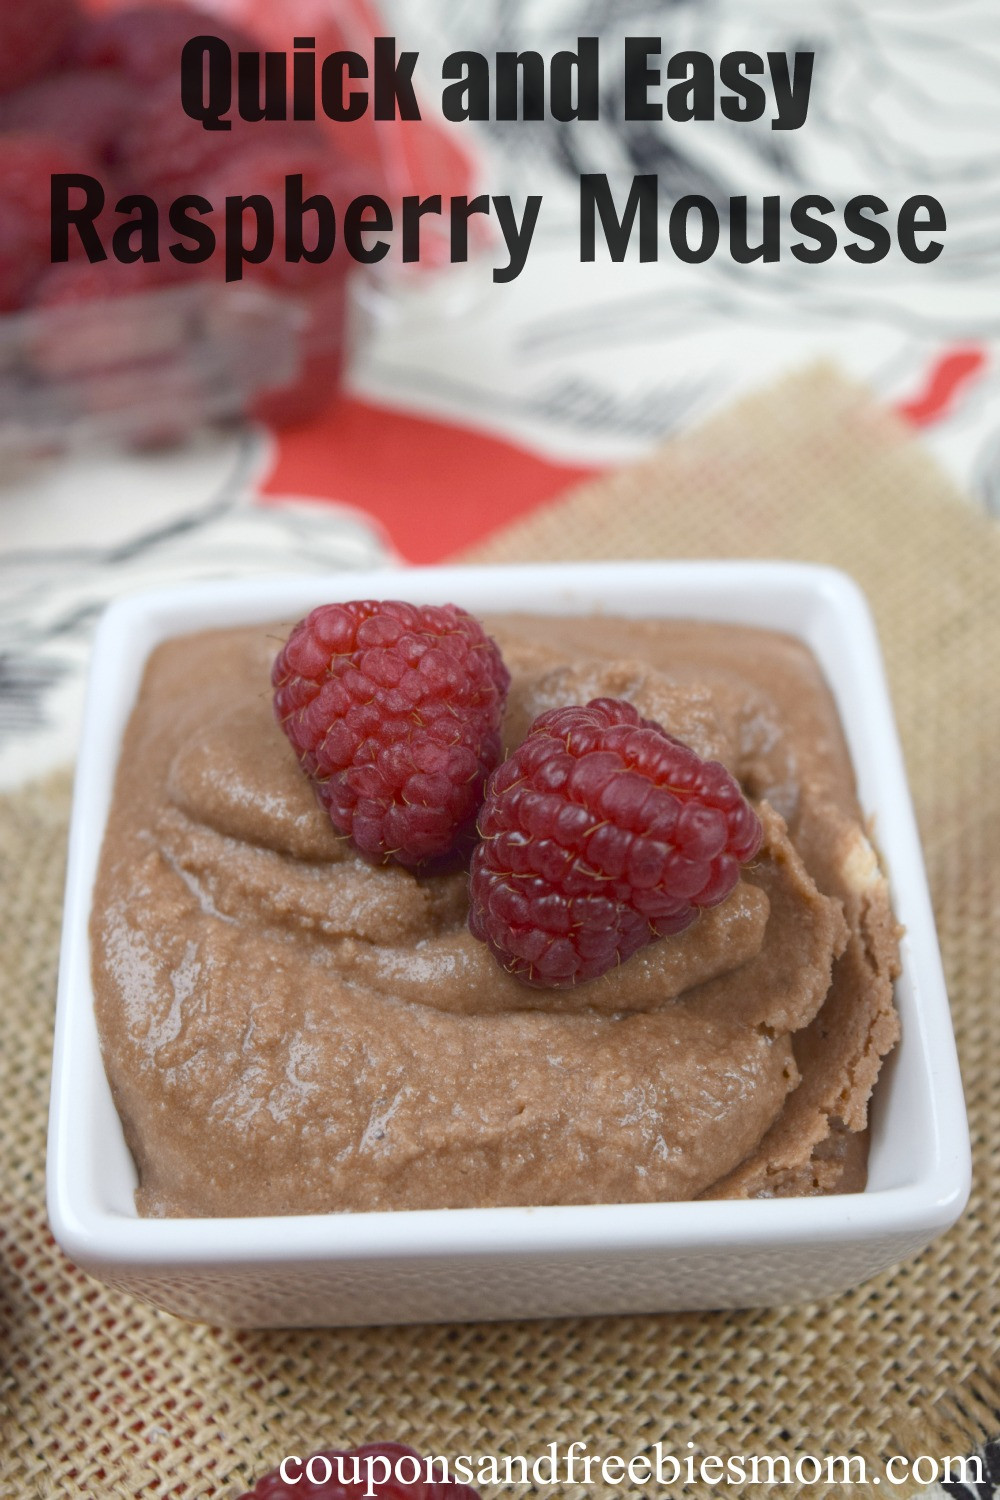 Easy Make Ahead Desserts
 Quick and Easy Raspberry Mousse Easy Make Ahead Dessert